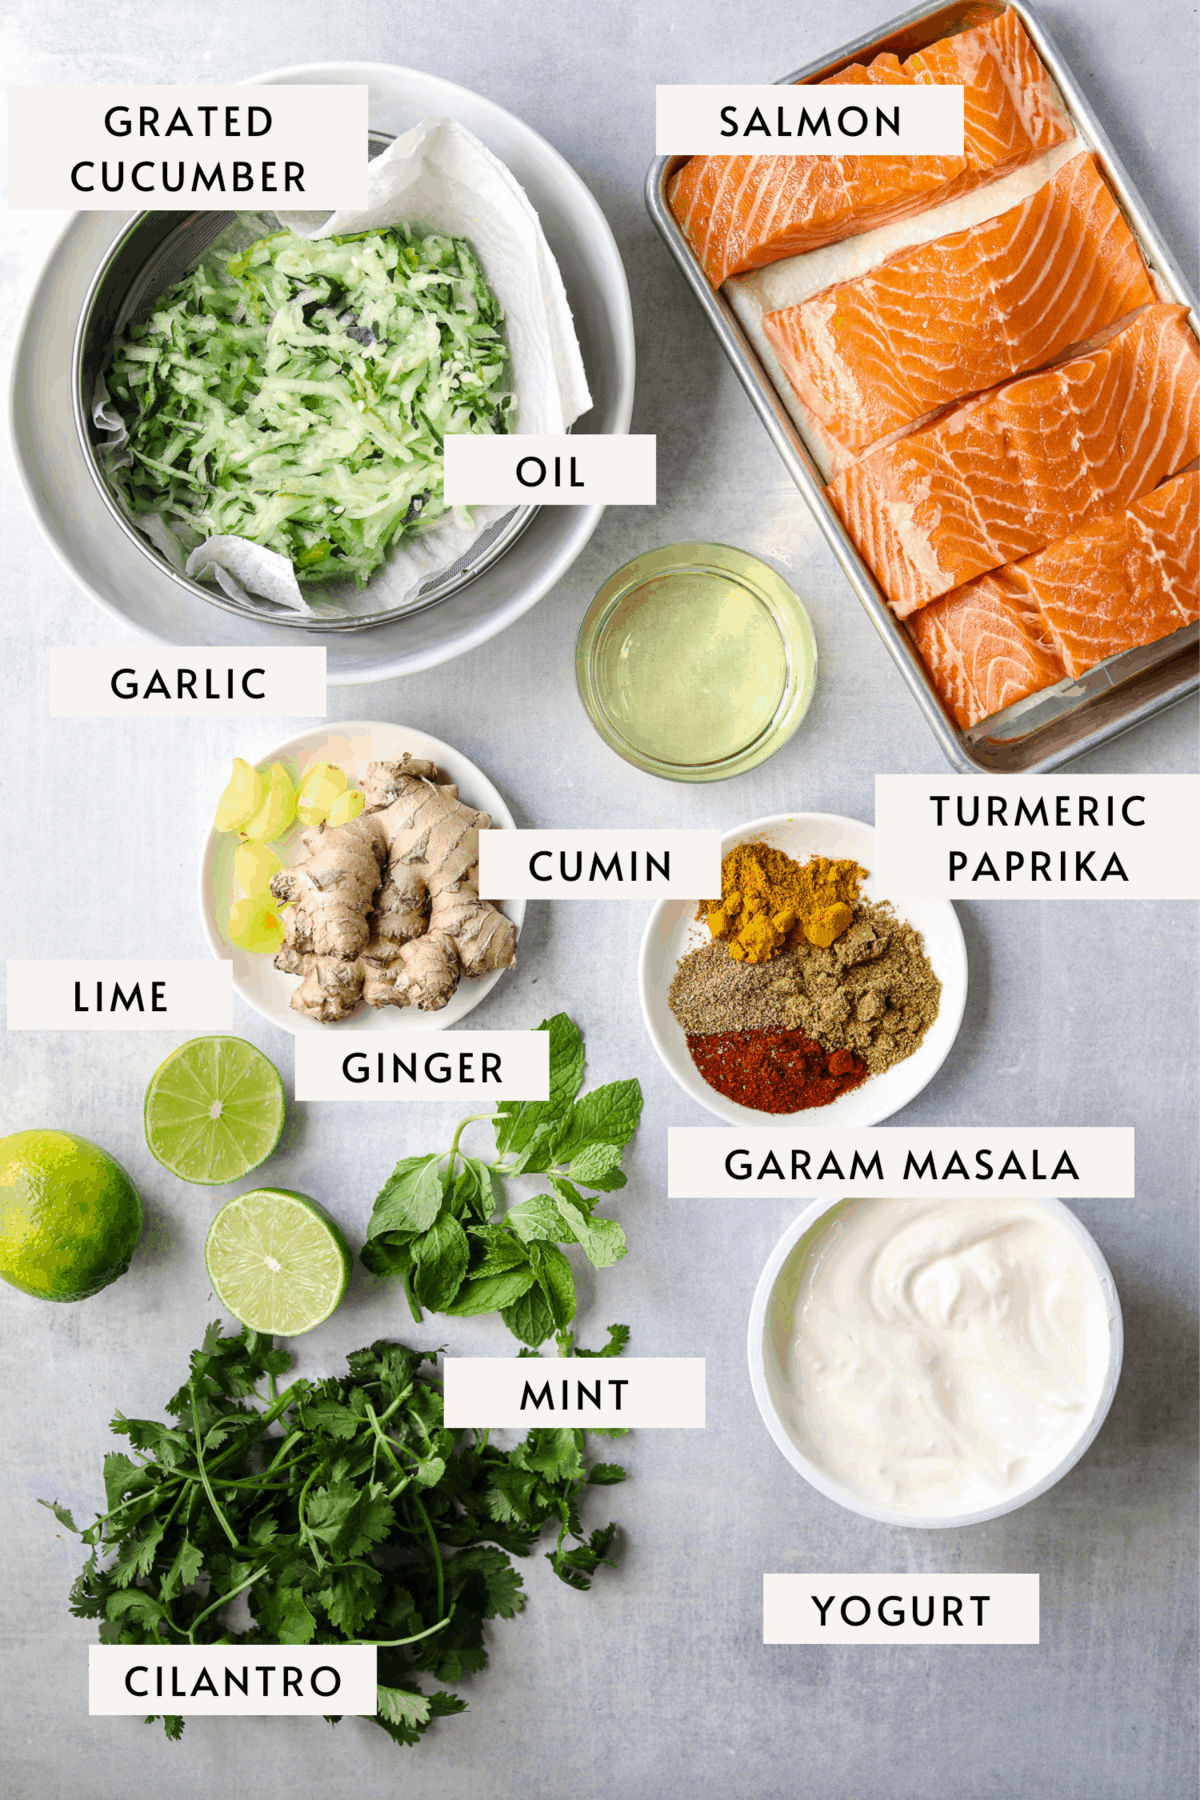 individual recipe ingredient: four salmon filets, grated cucumber, spices, garlic, ginger, yogurt, lime and mint